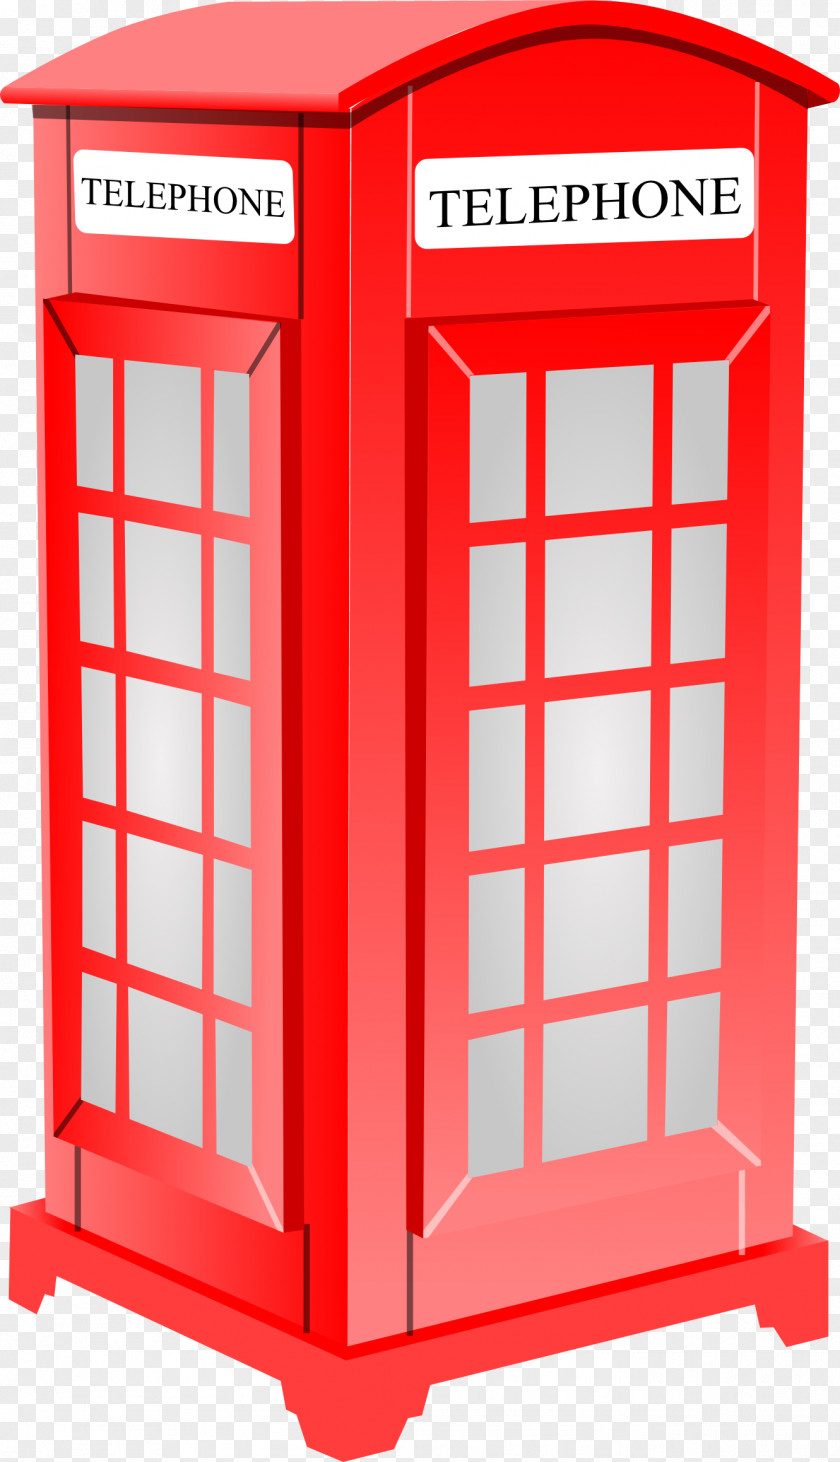 Booth London Telephone Red Box Clip Art PNG